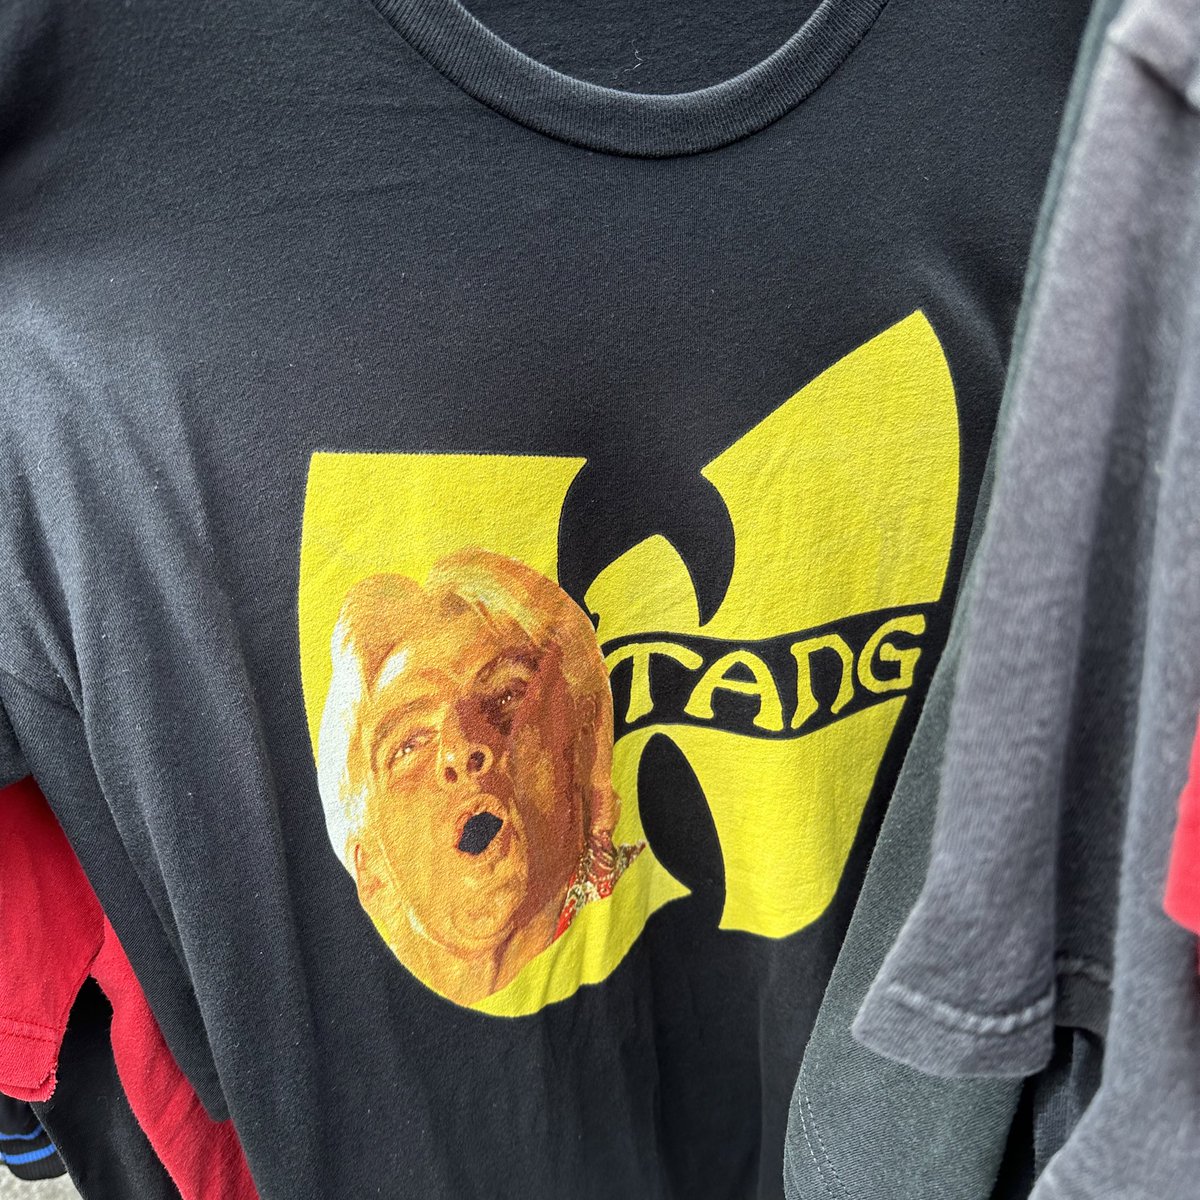 The perfect tshirt doesn’t exis-